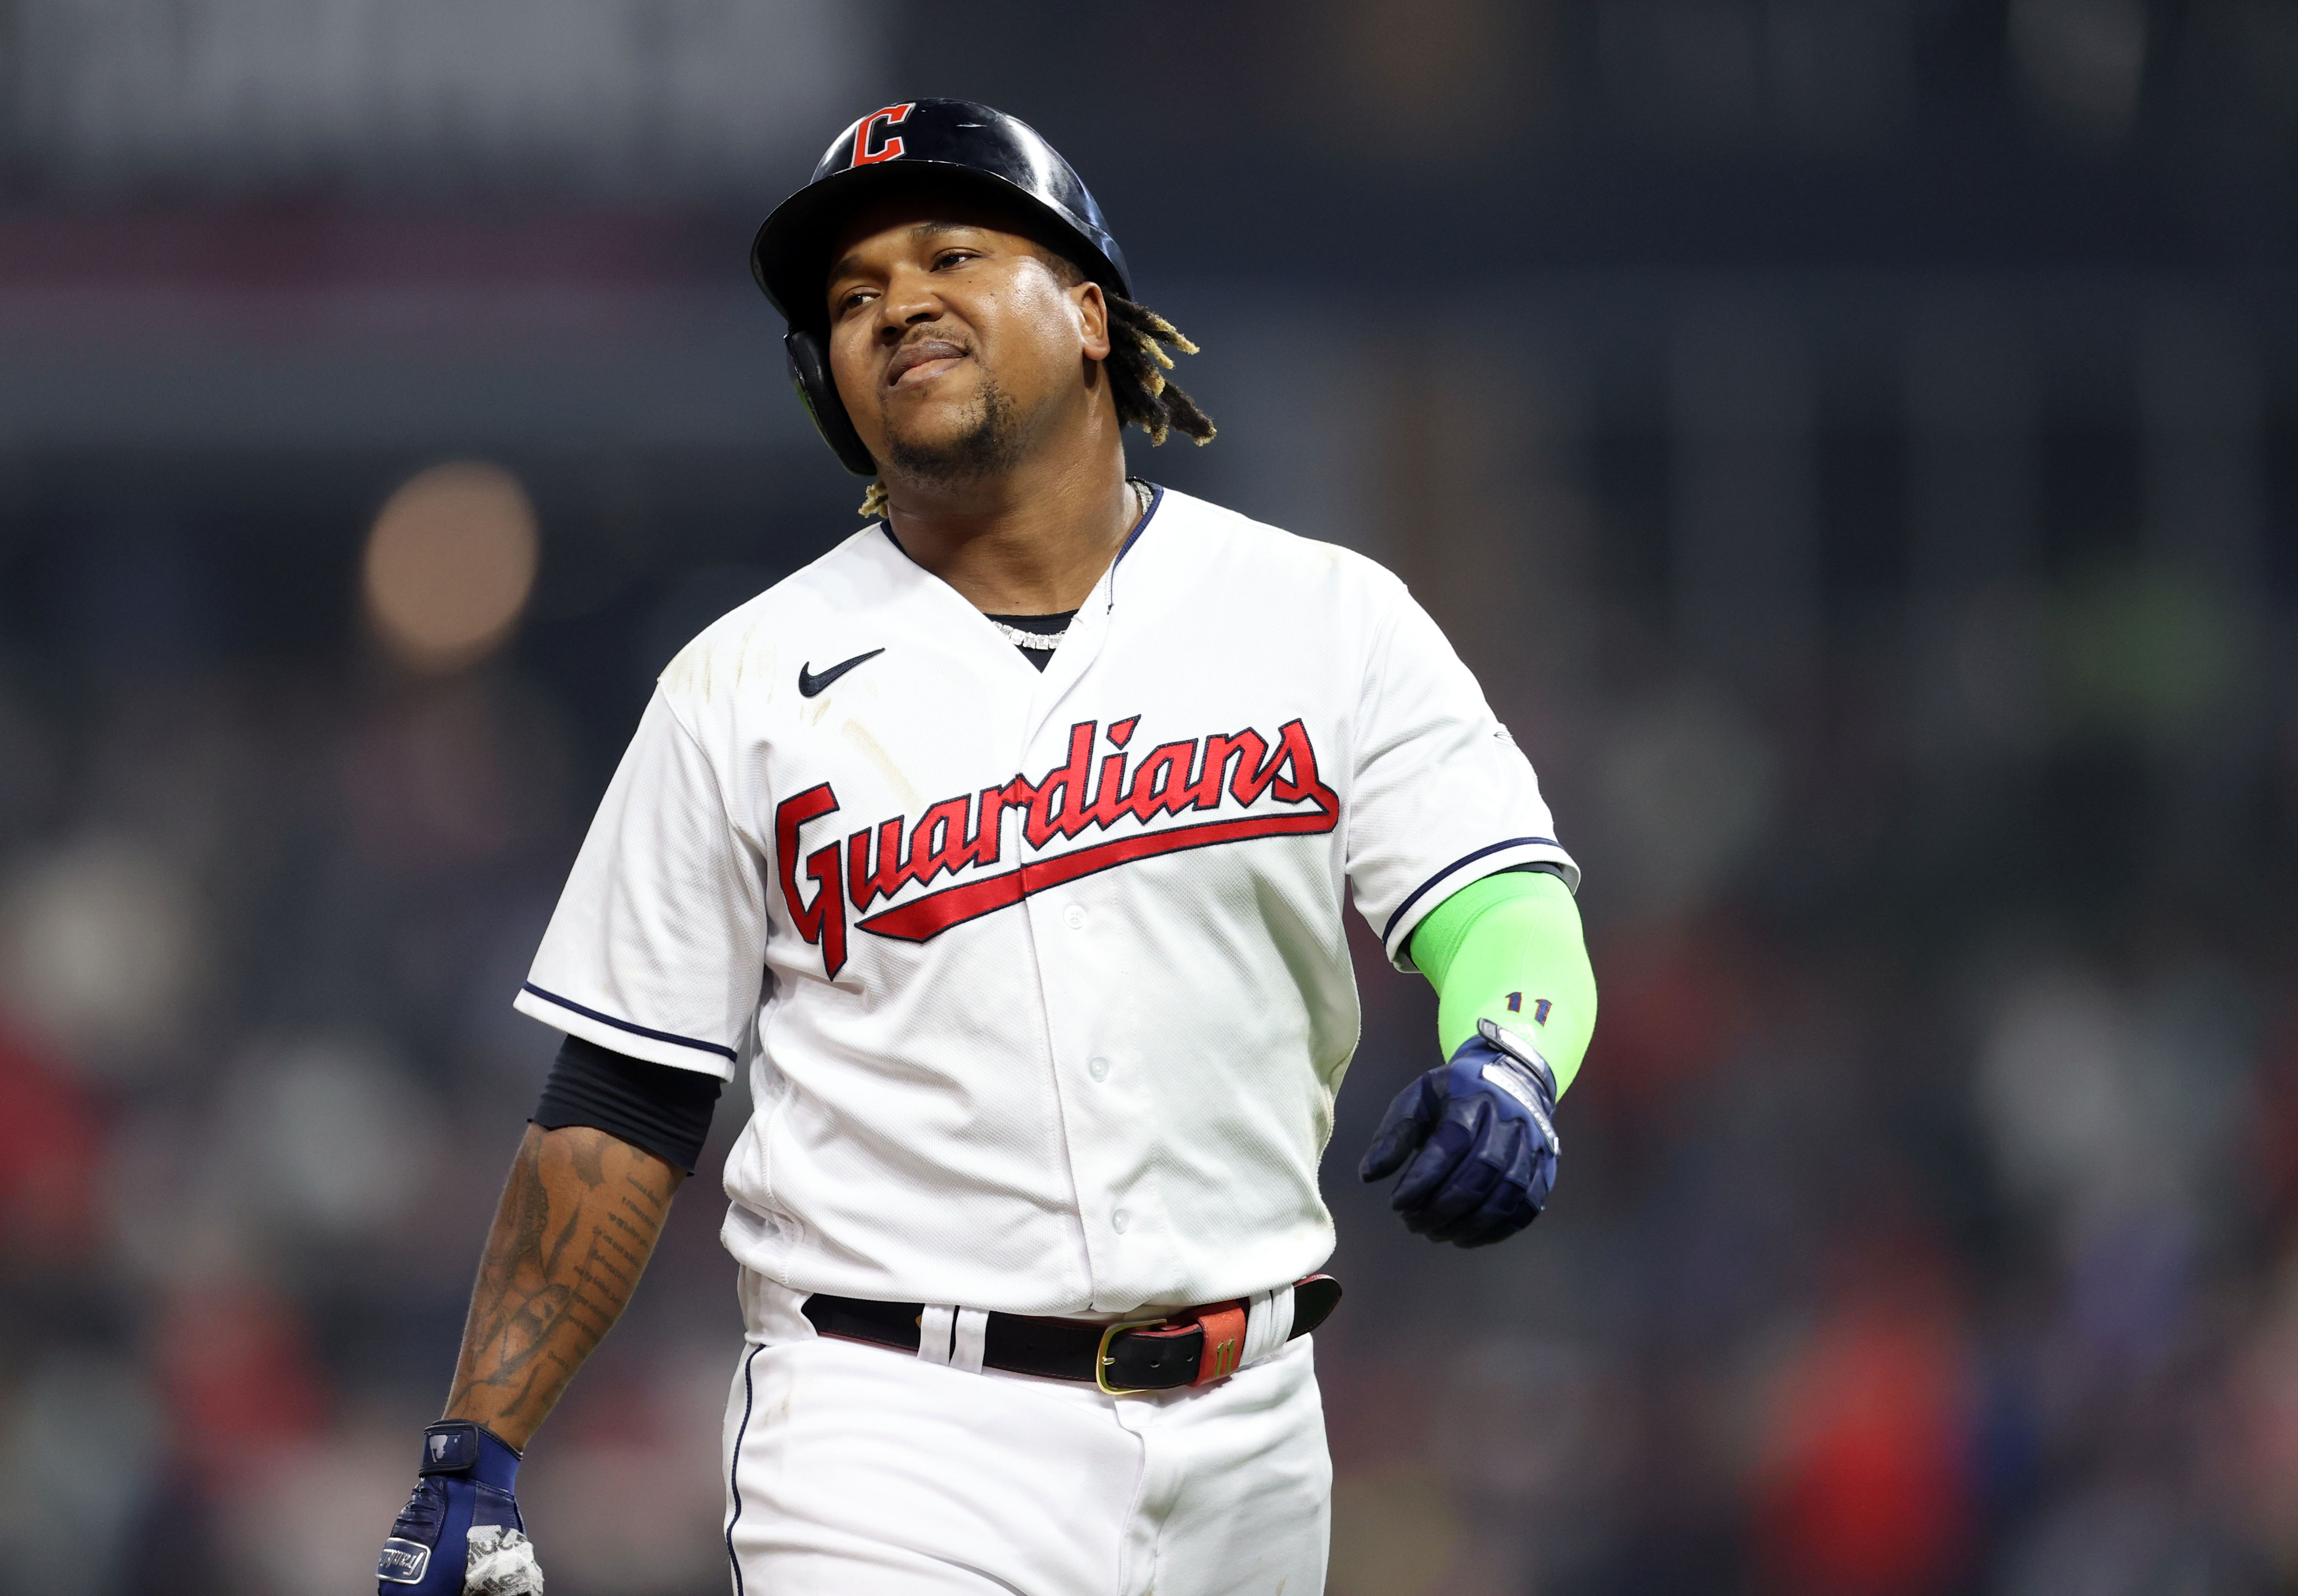 It's Time to Pay Attention to Jose Ramirez